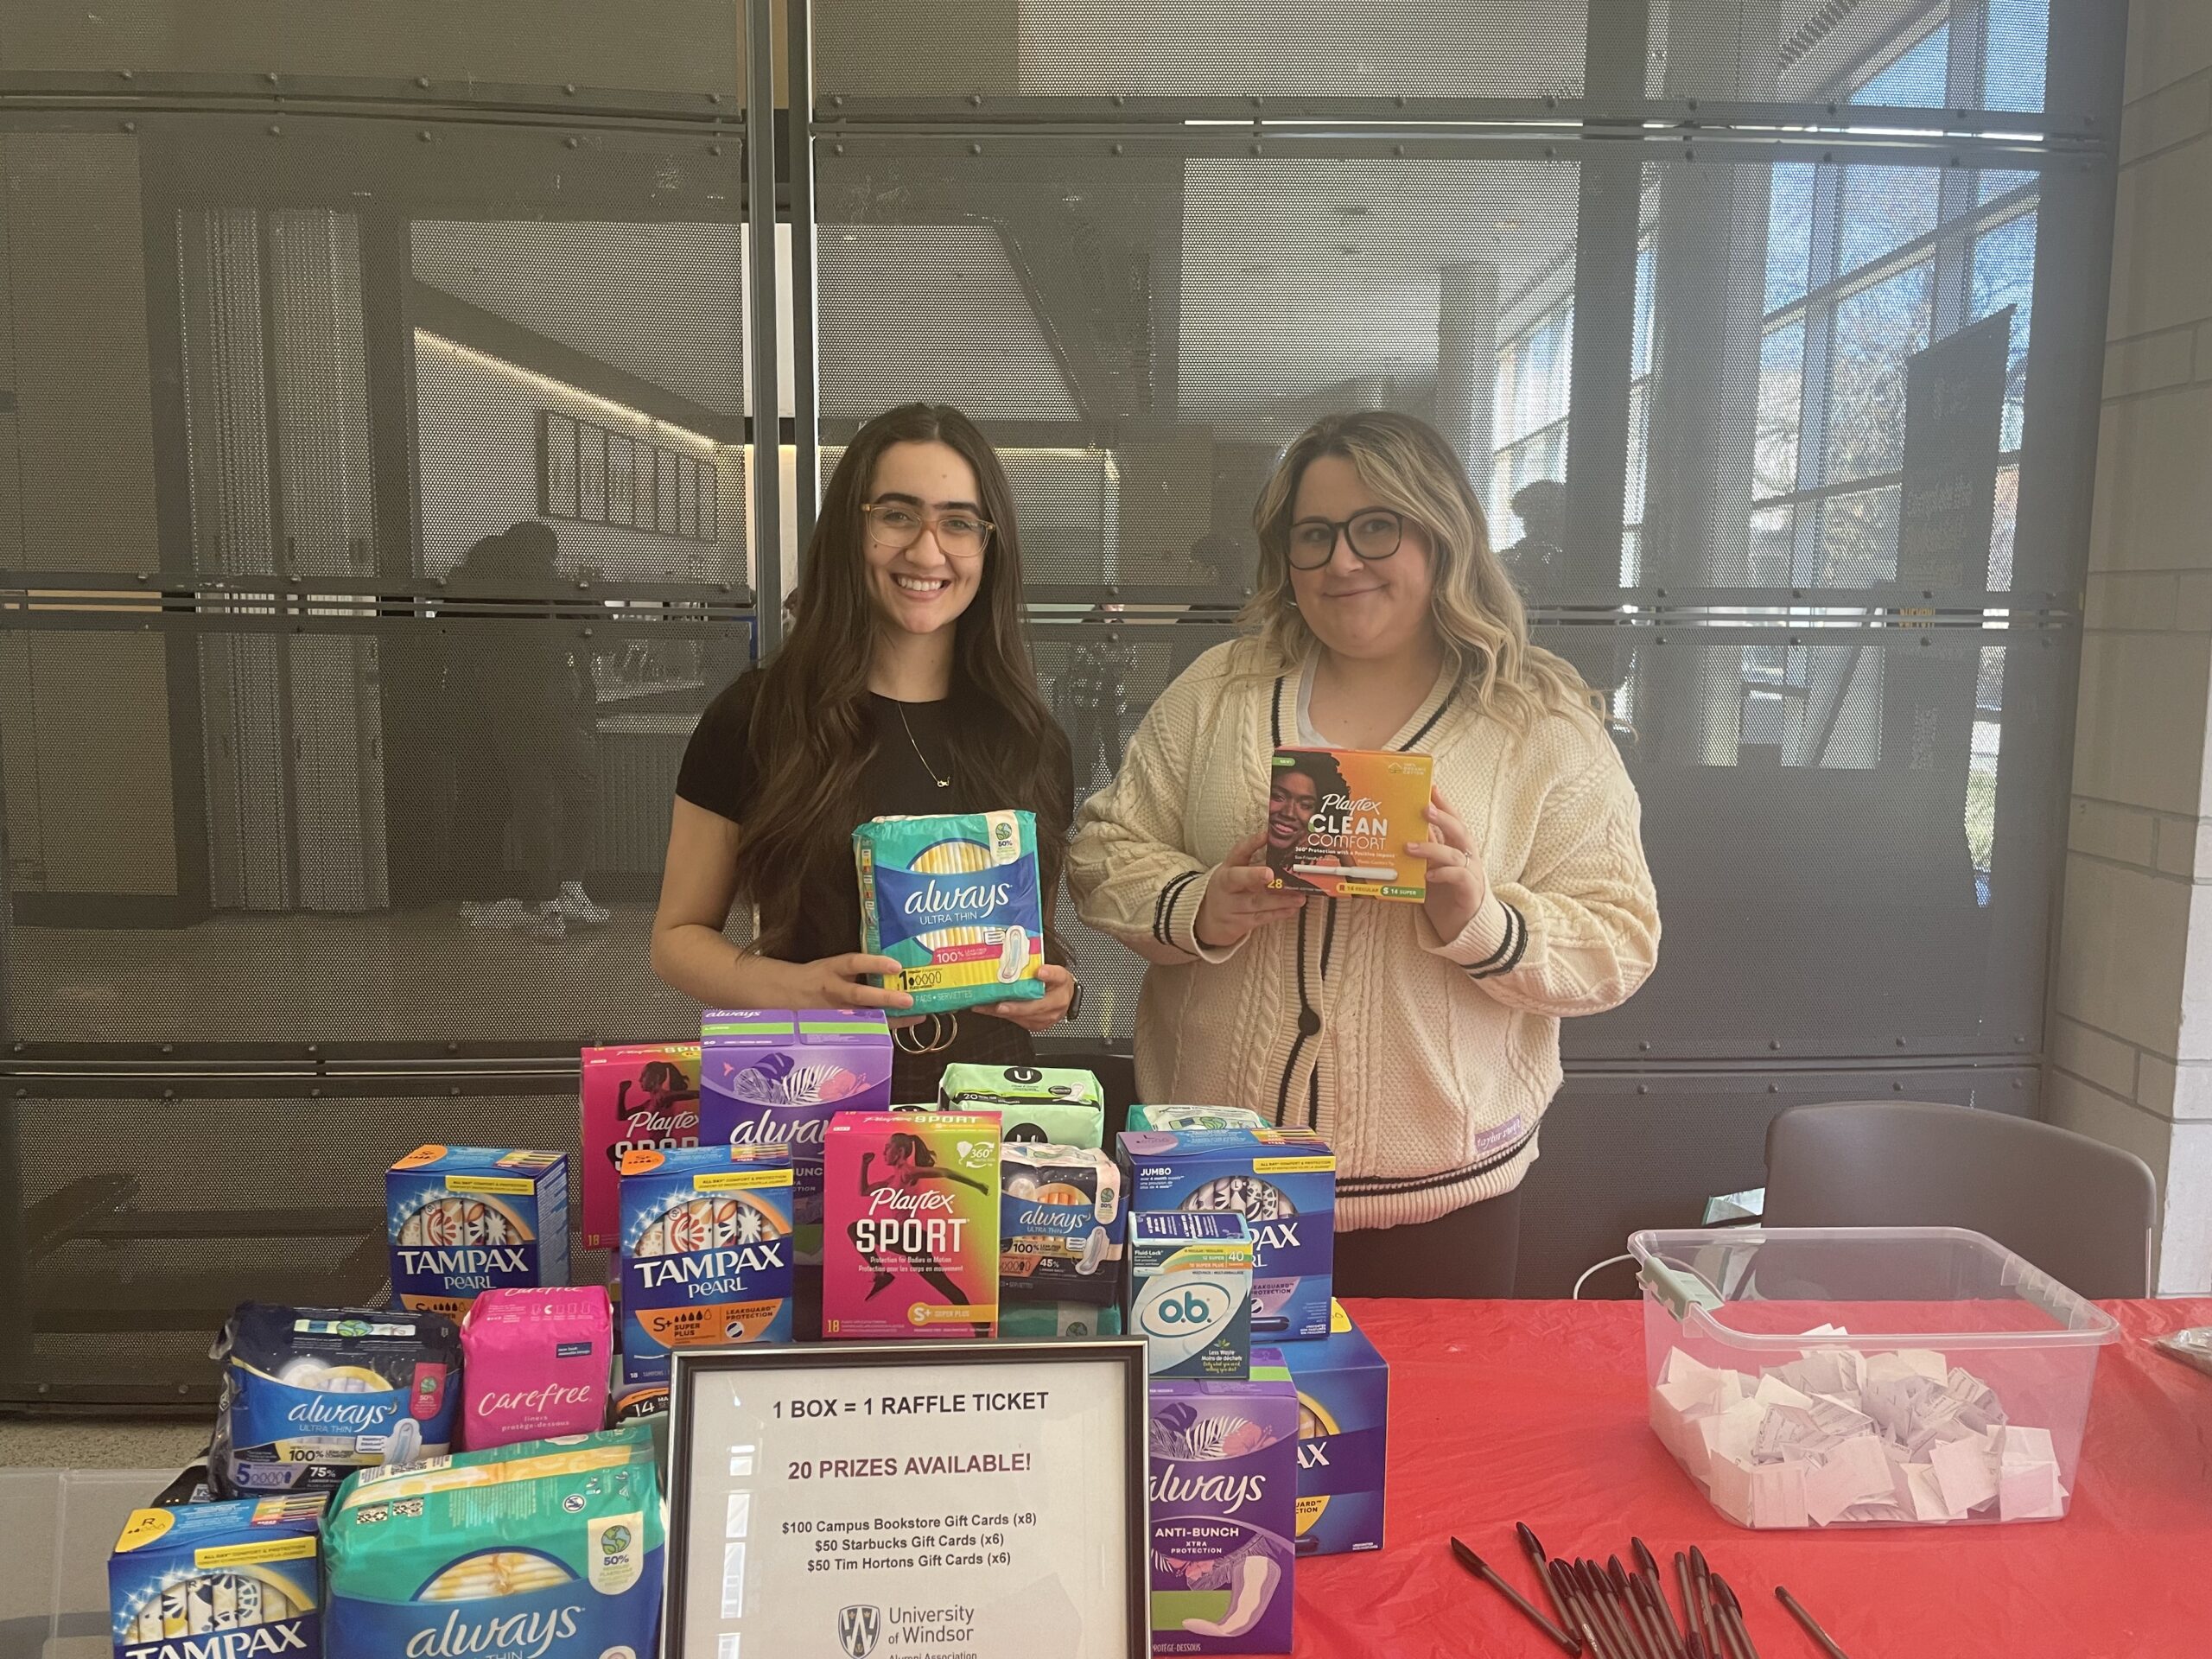 Tampon Tuesday Sparks Activism and Community Involvement at UWindsor in Addressing Period Poverty